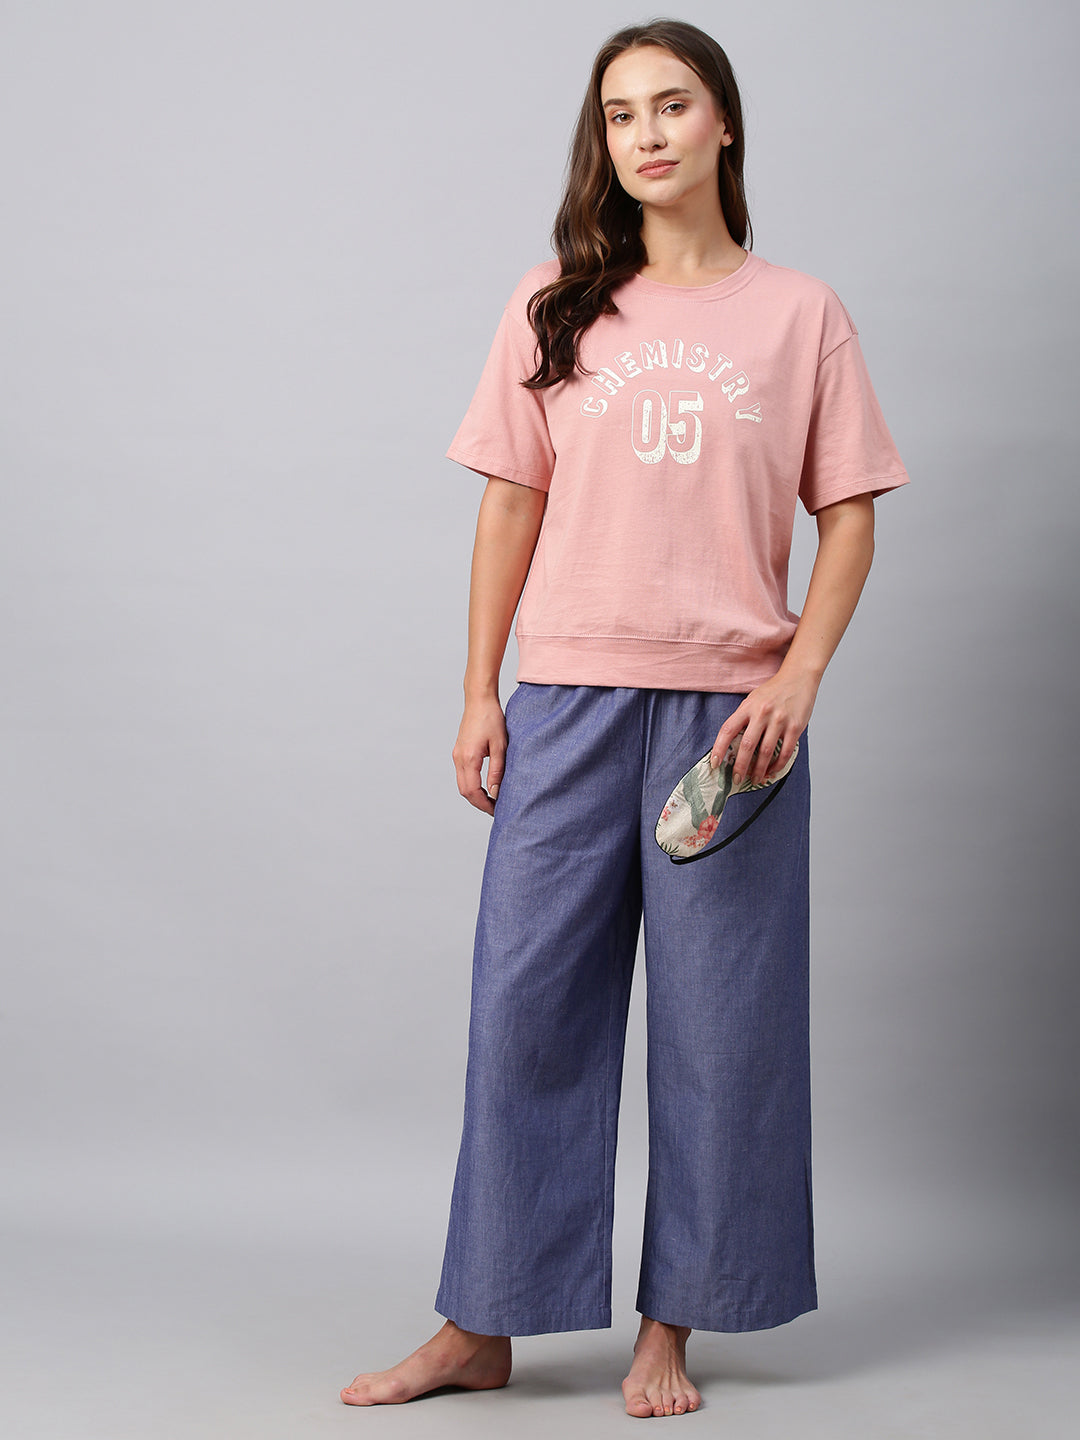 Drop Shoulder Graphic Printed Cotton Jersey Tee W/ Chambray Wide Leg Pj's